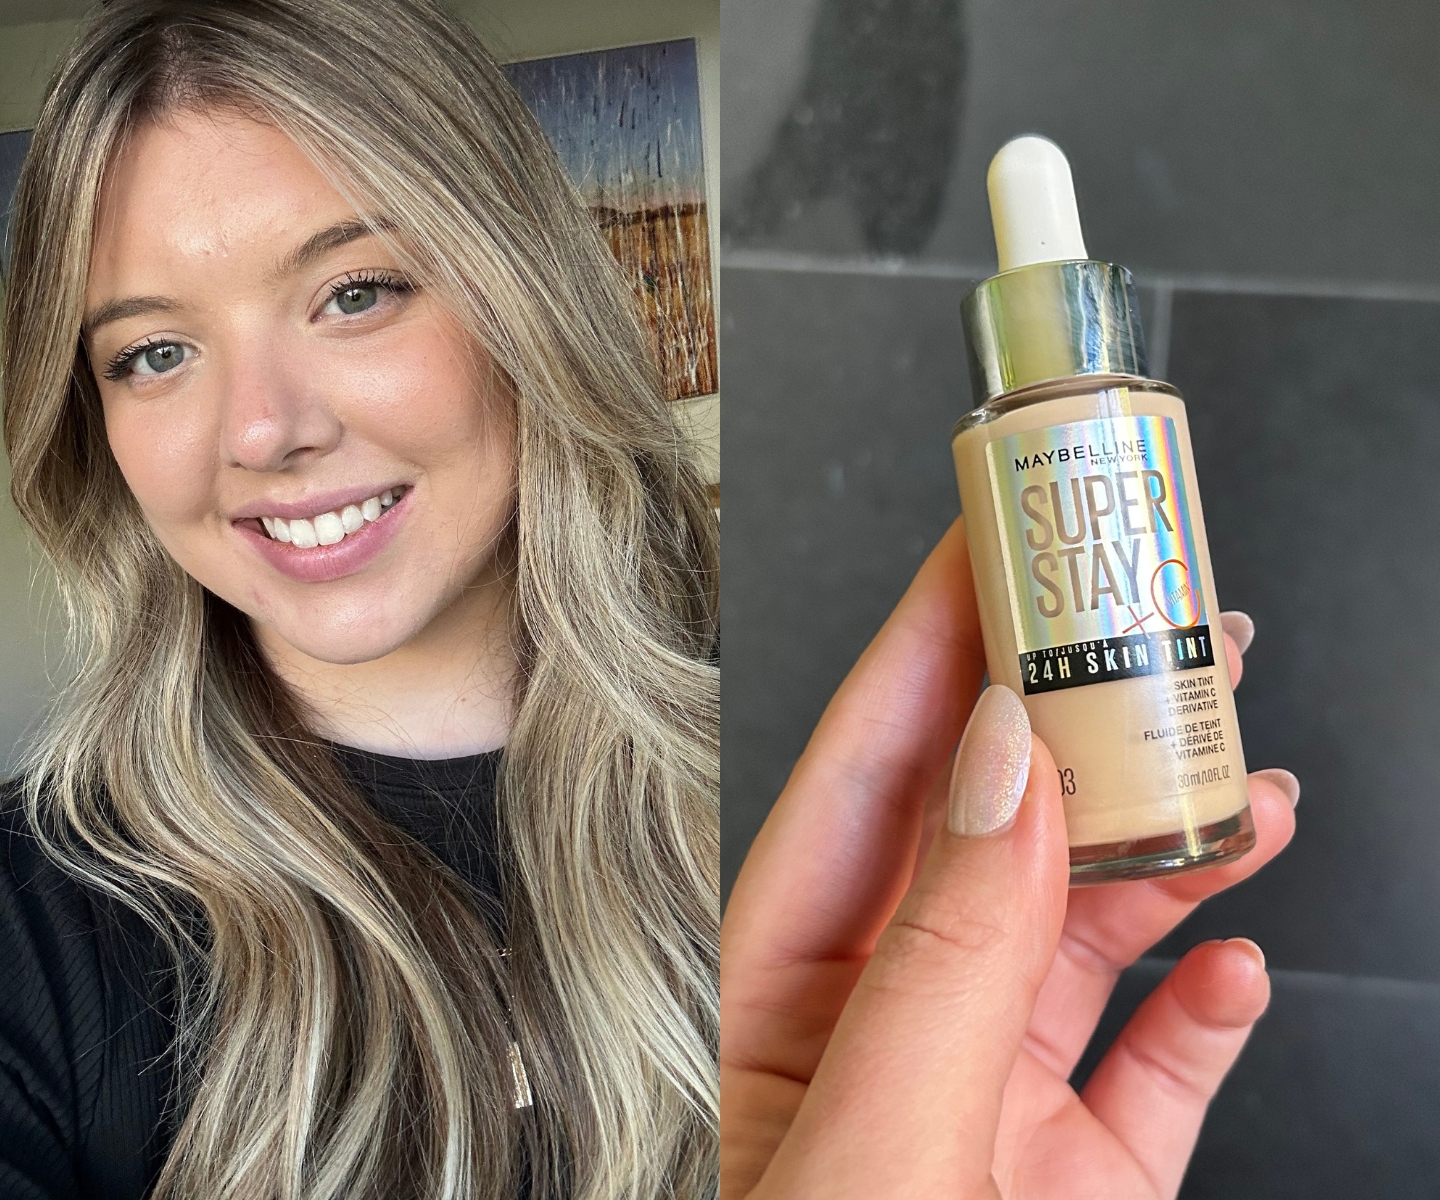 I Tried the Maybelline Superstay Skin Tint Blowing Up My TikTok Feed